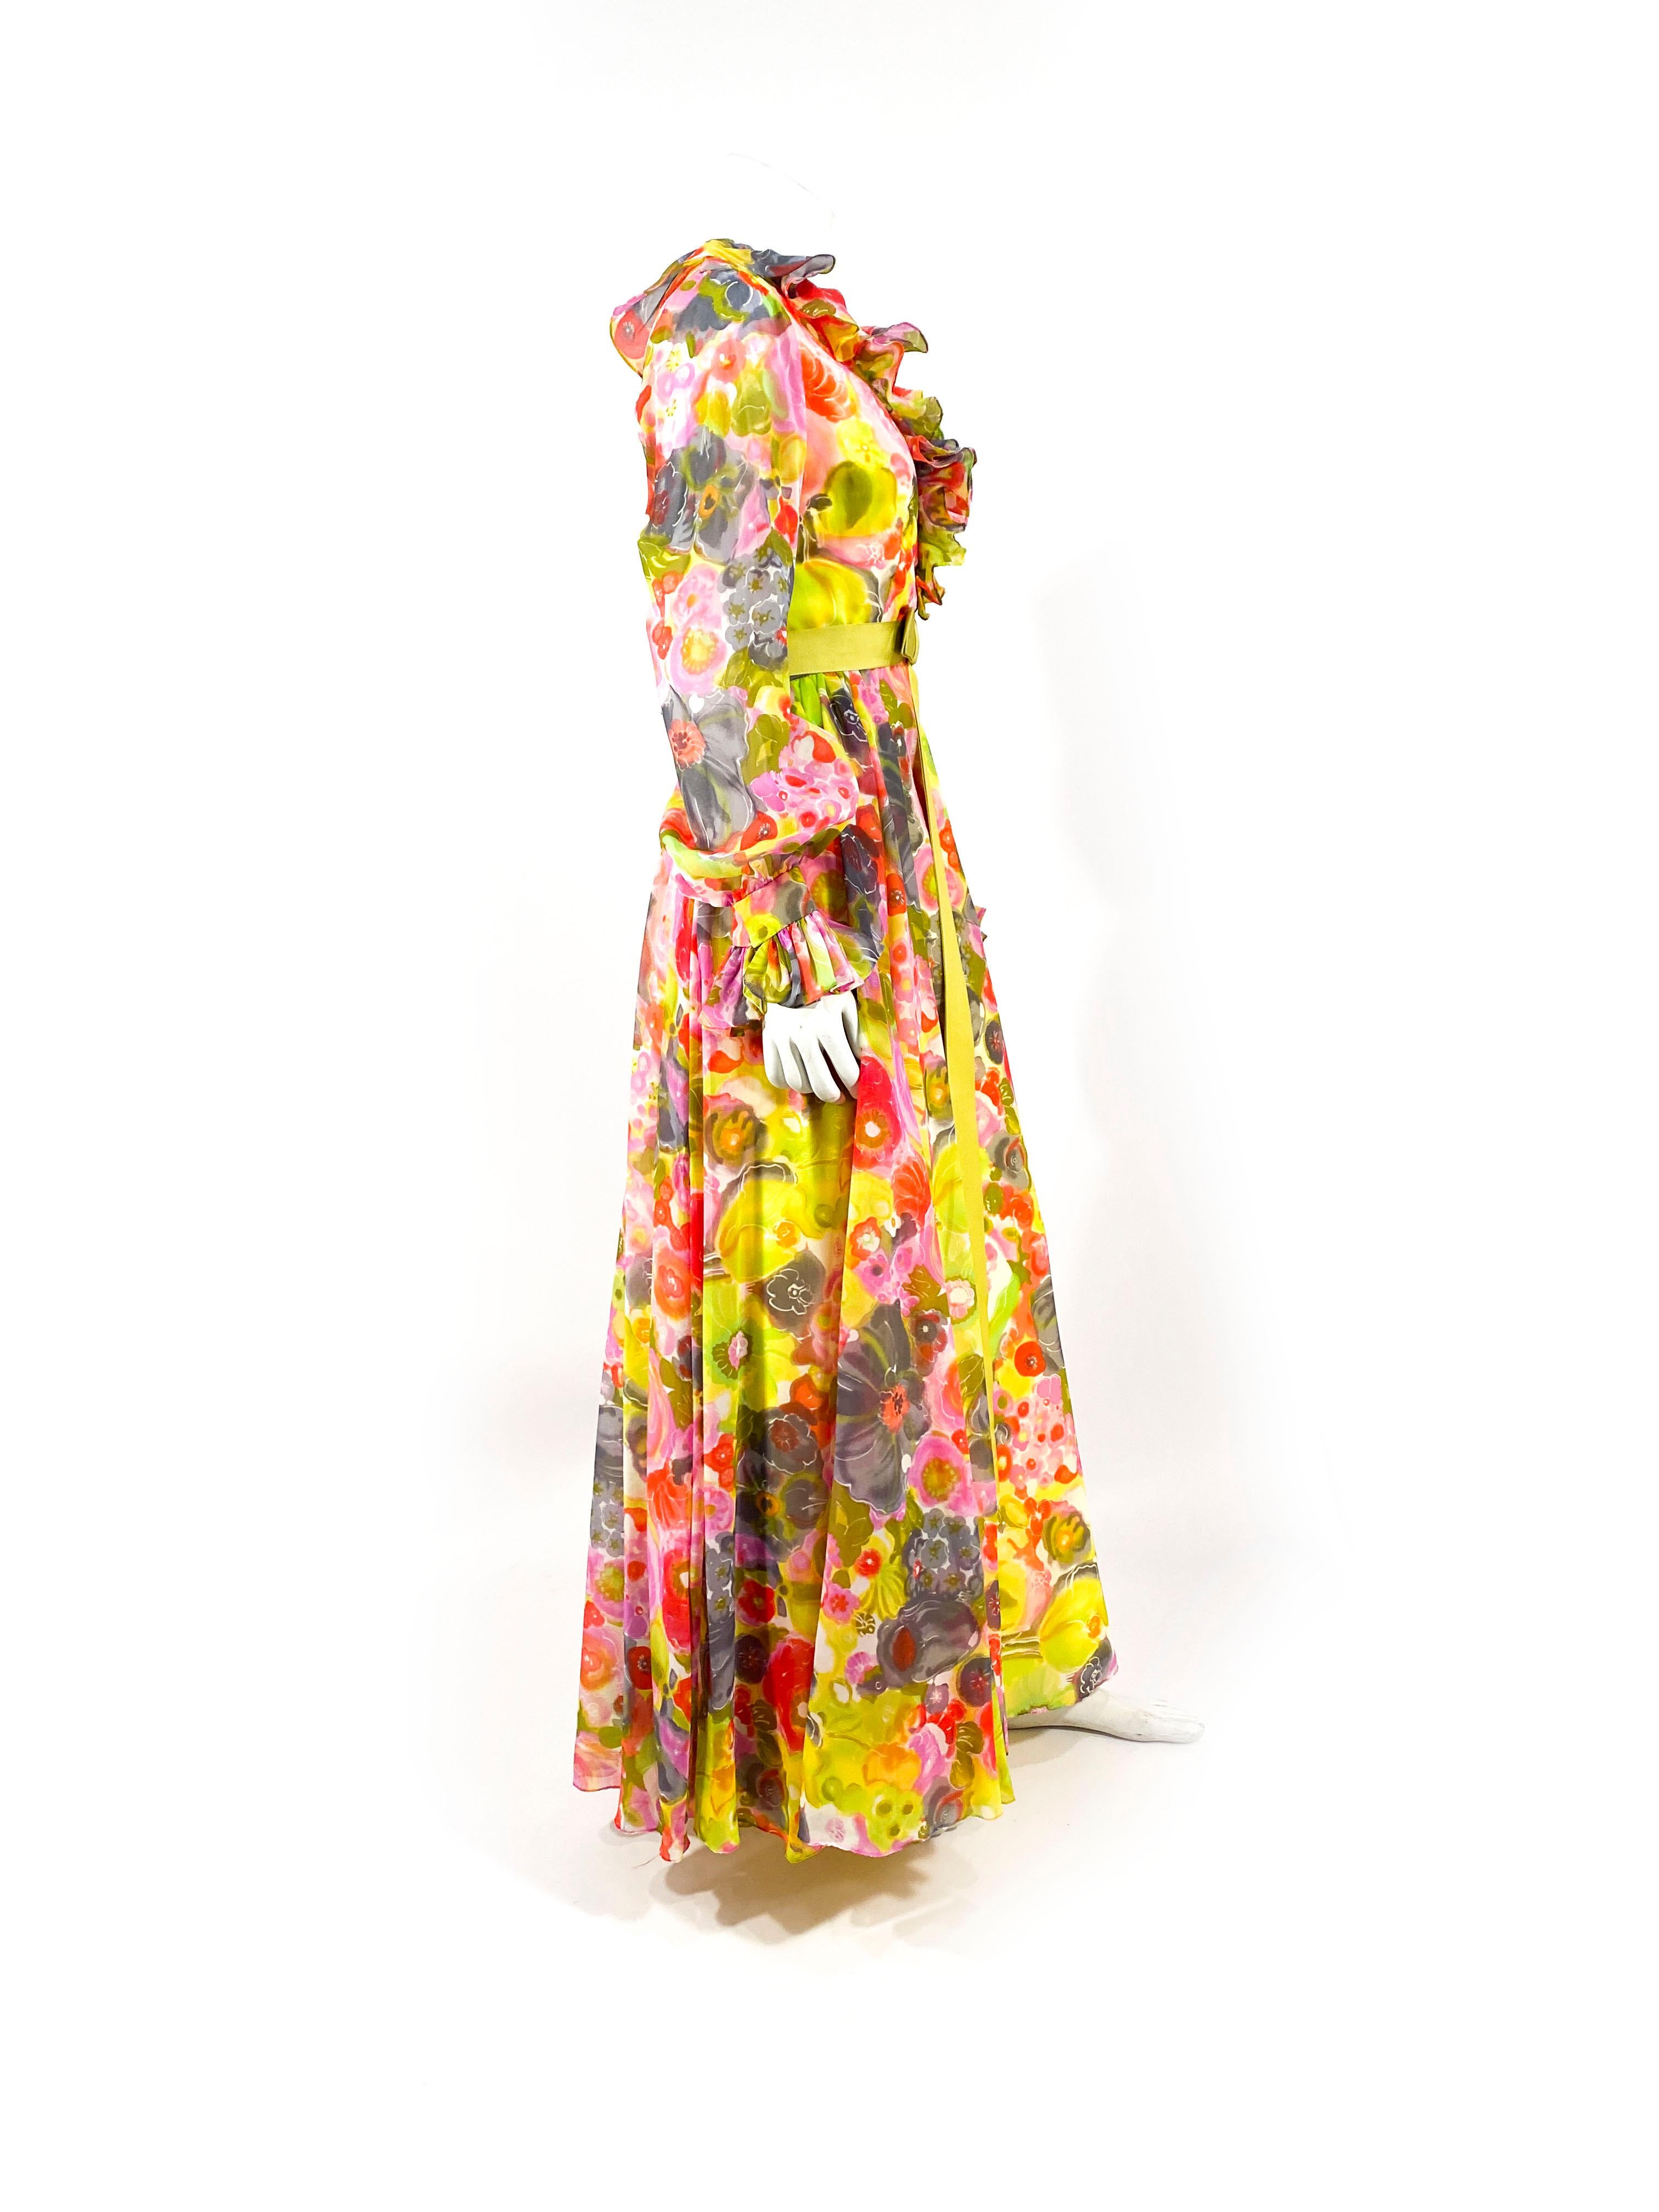 Women's 1970s Multi-colored Floral Printed Chiffon Dress